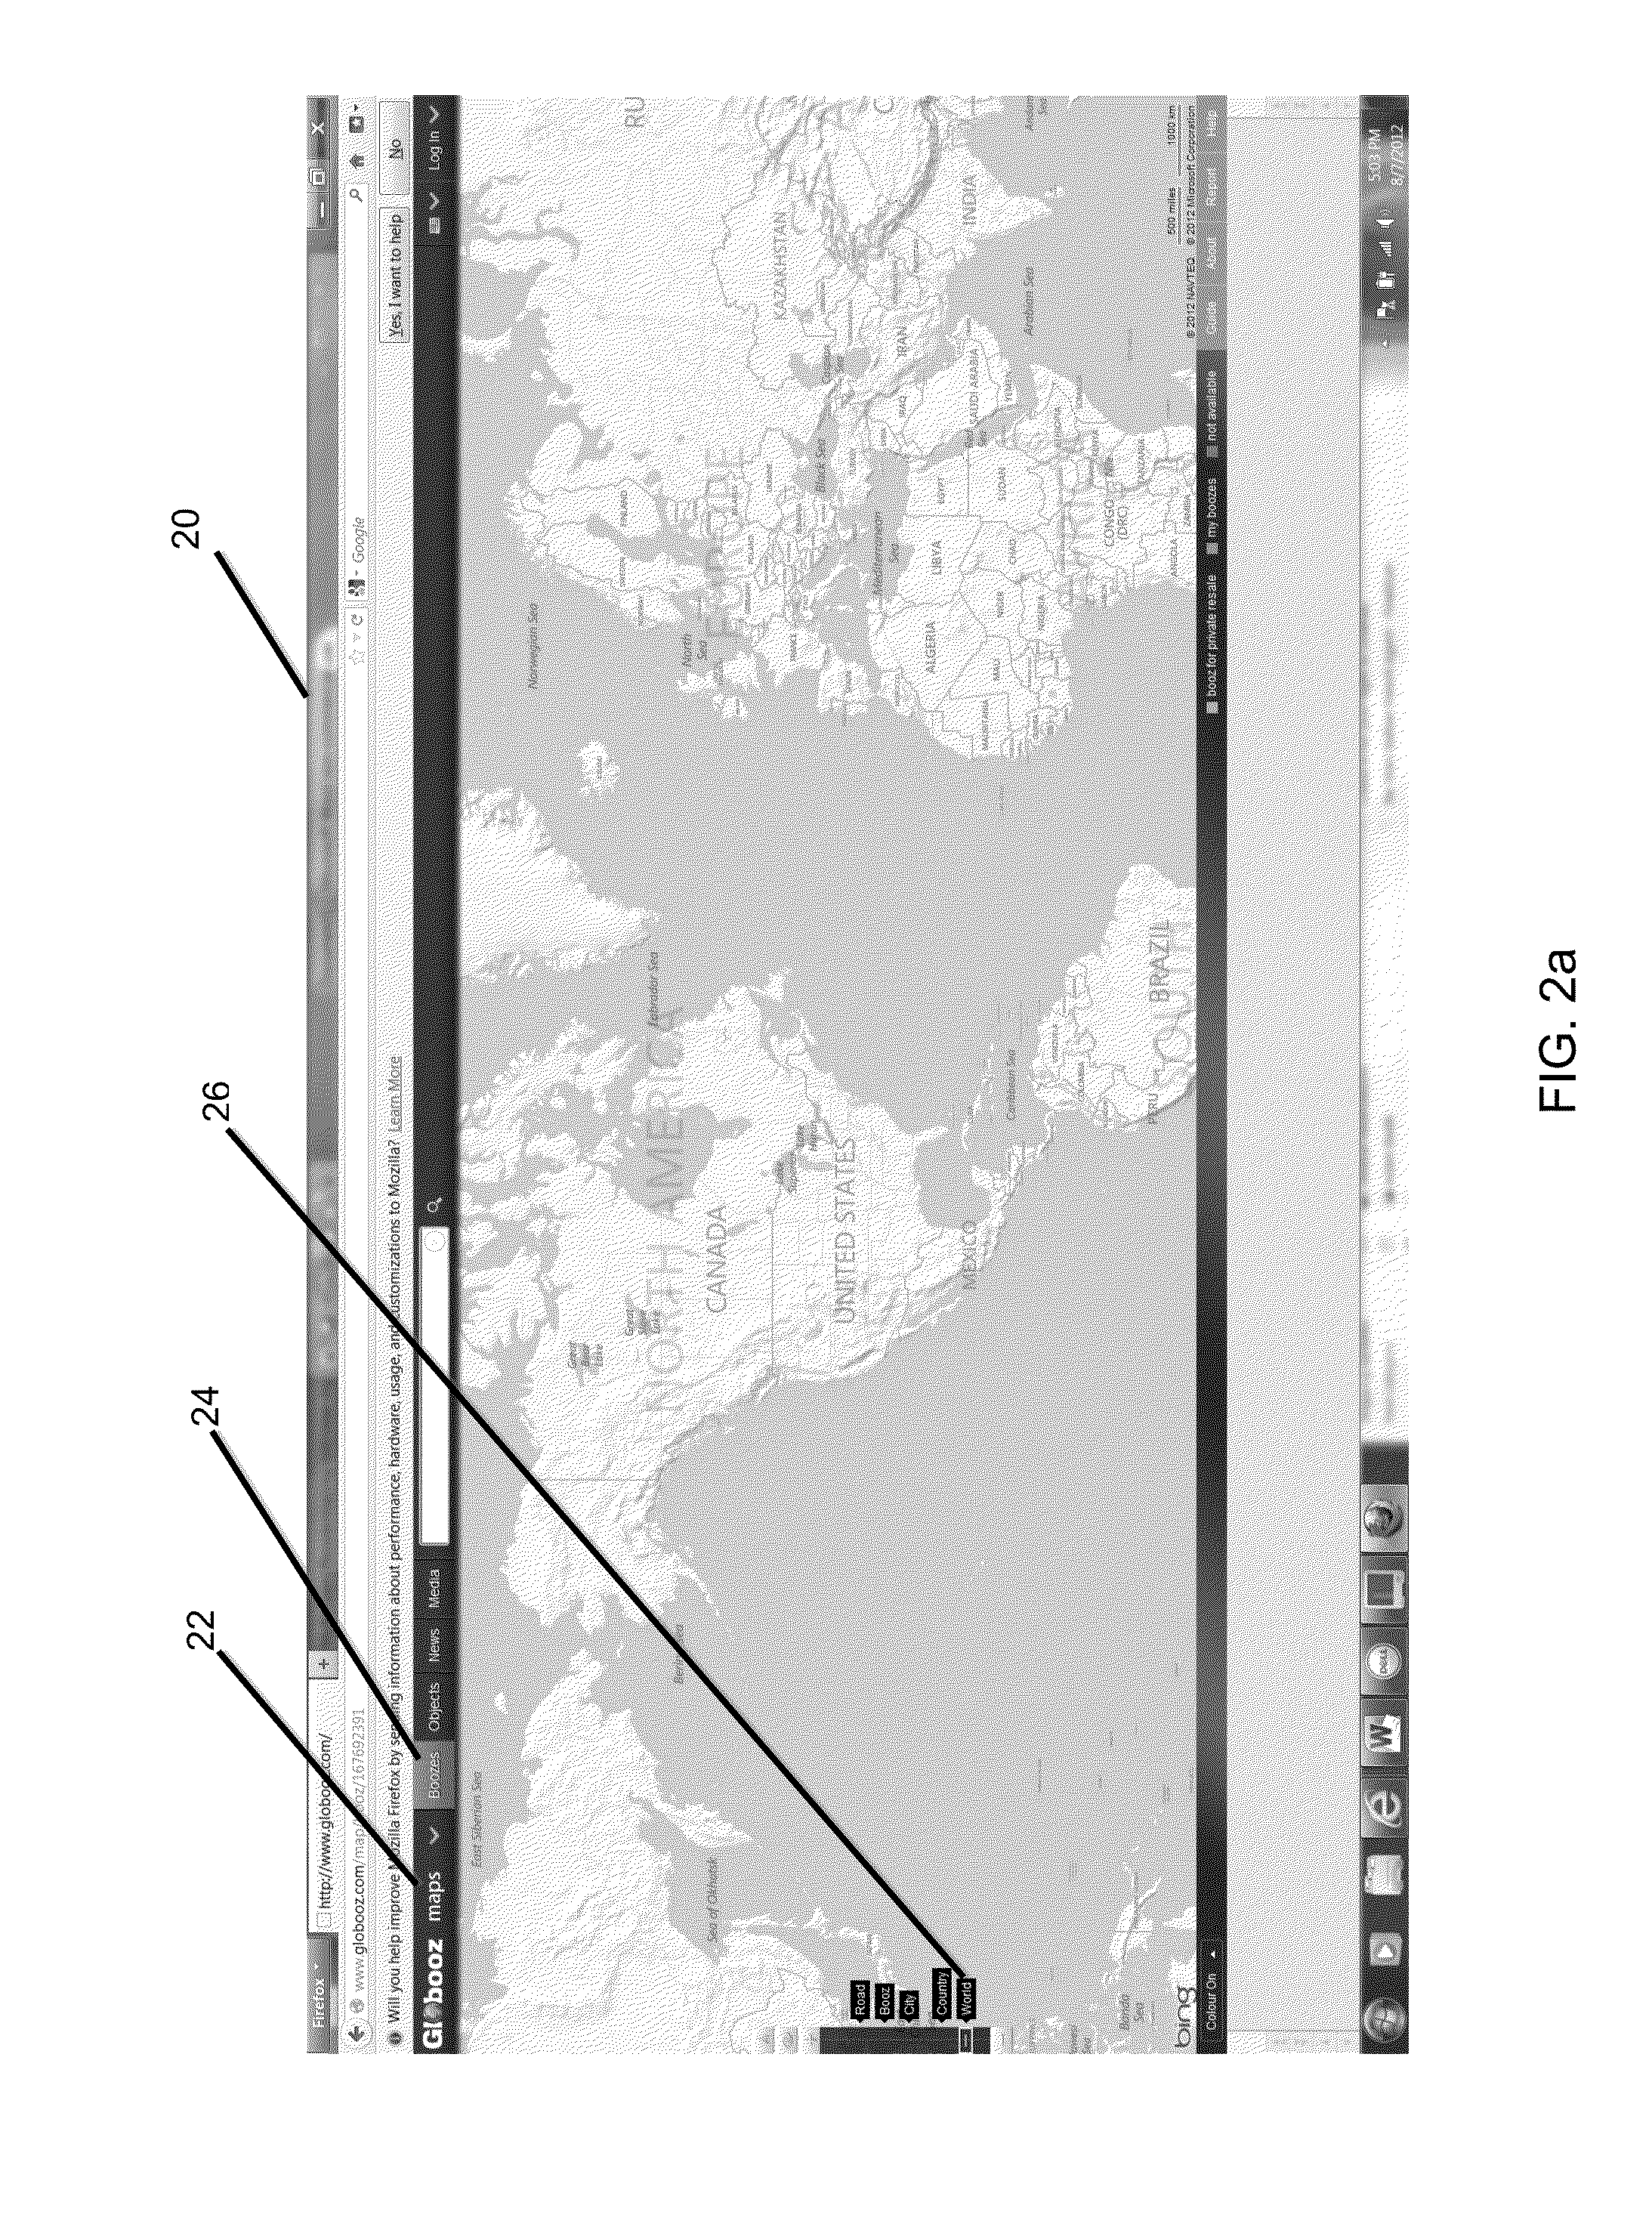 System and method for managing information related to spatially resolved units